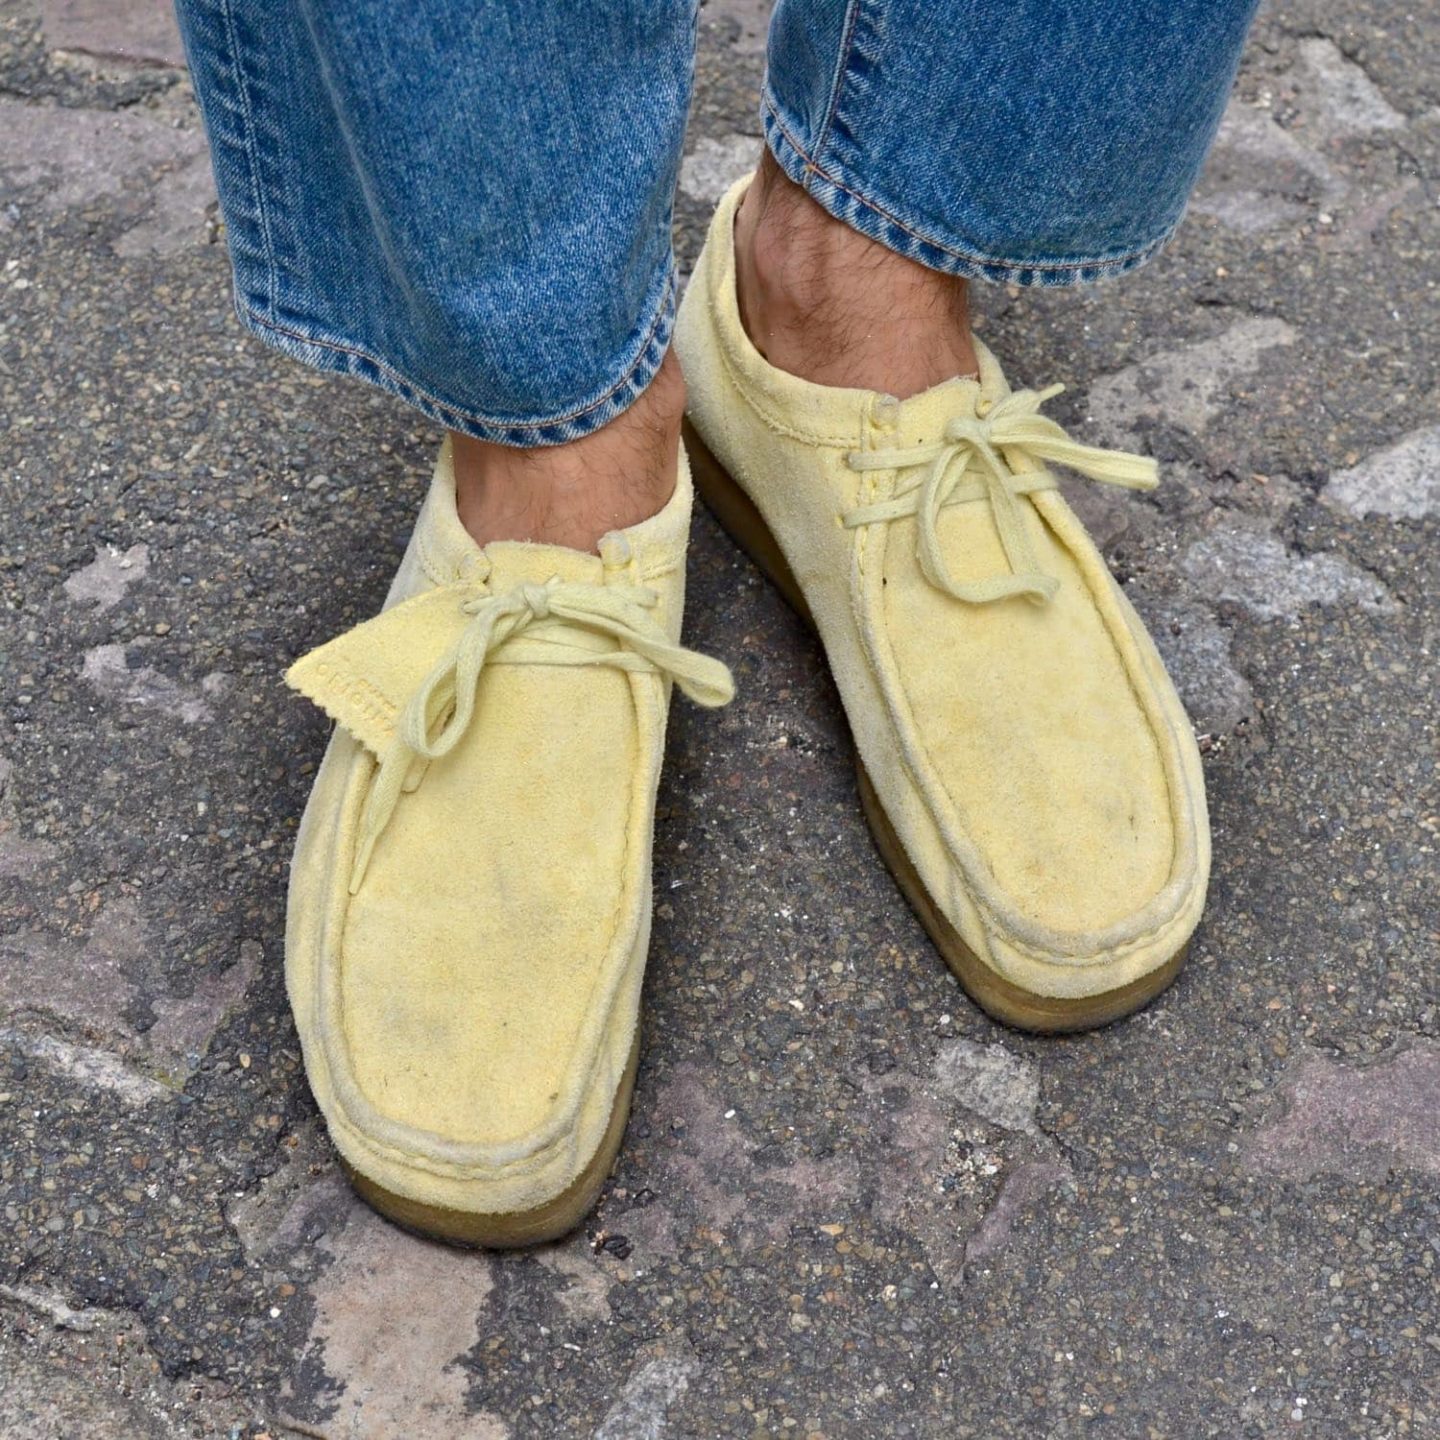 clarks wallabees low yello wsuede leather